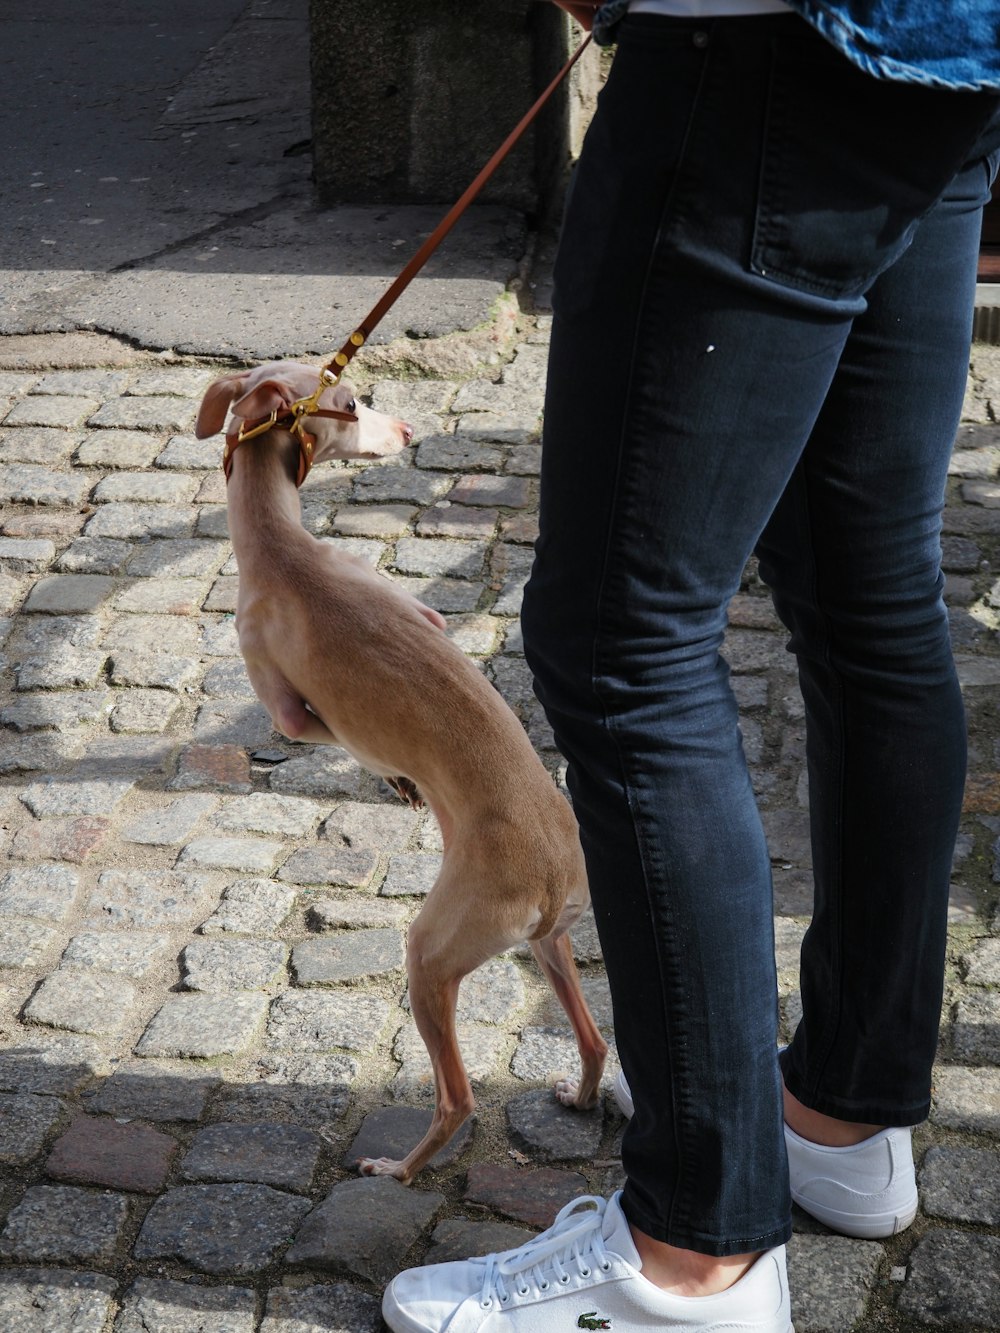 a small dog on a leash being held by a person